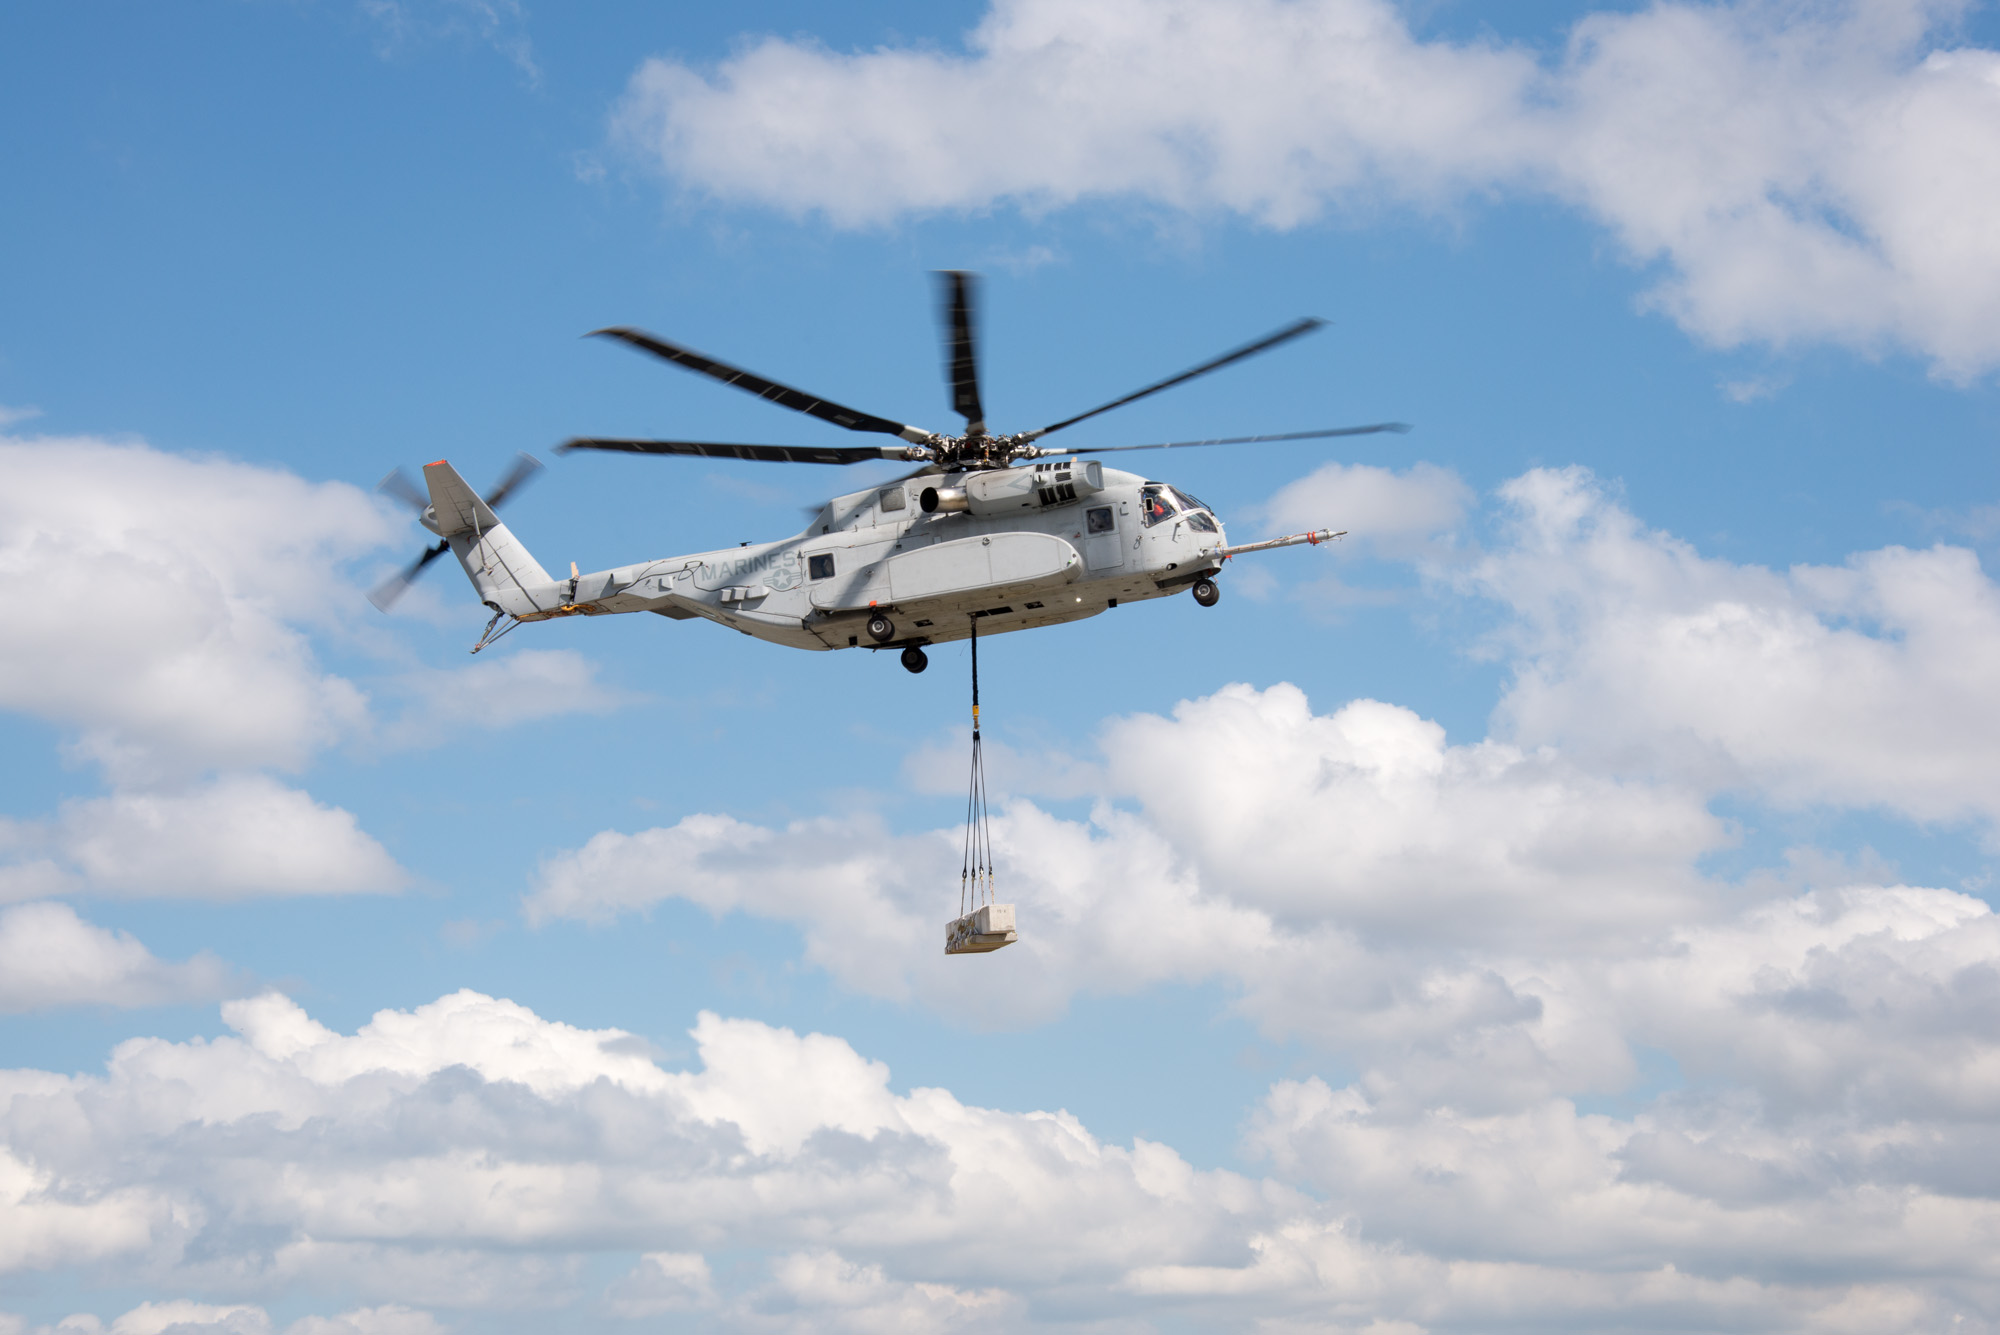 The U.S. Marine Corps' newest helicopter, the CH-53K, completed its first external load flight test carrying a 20,000 lb. load May 26 at Sikorsky Aircraft Corporation's Development Flight Center in West Palm Beach, Fla. Sikorsky photo.